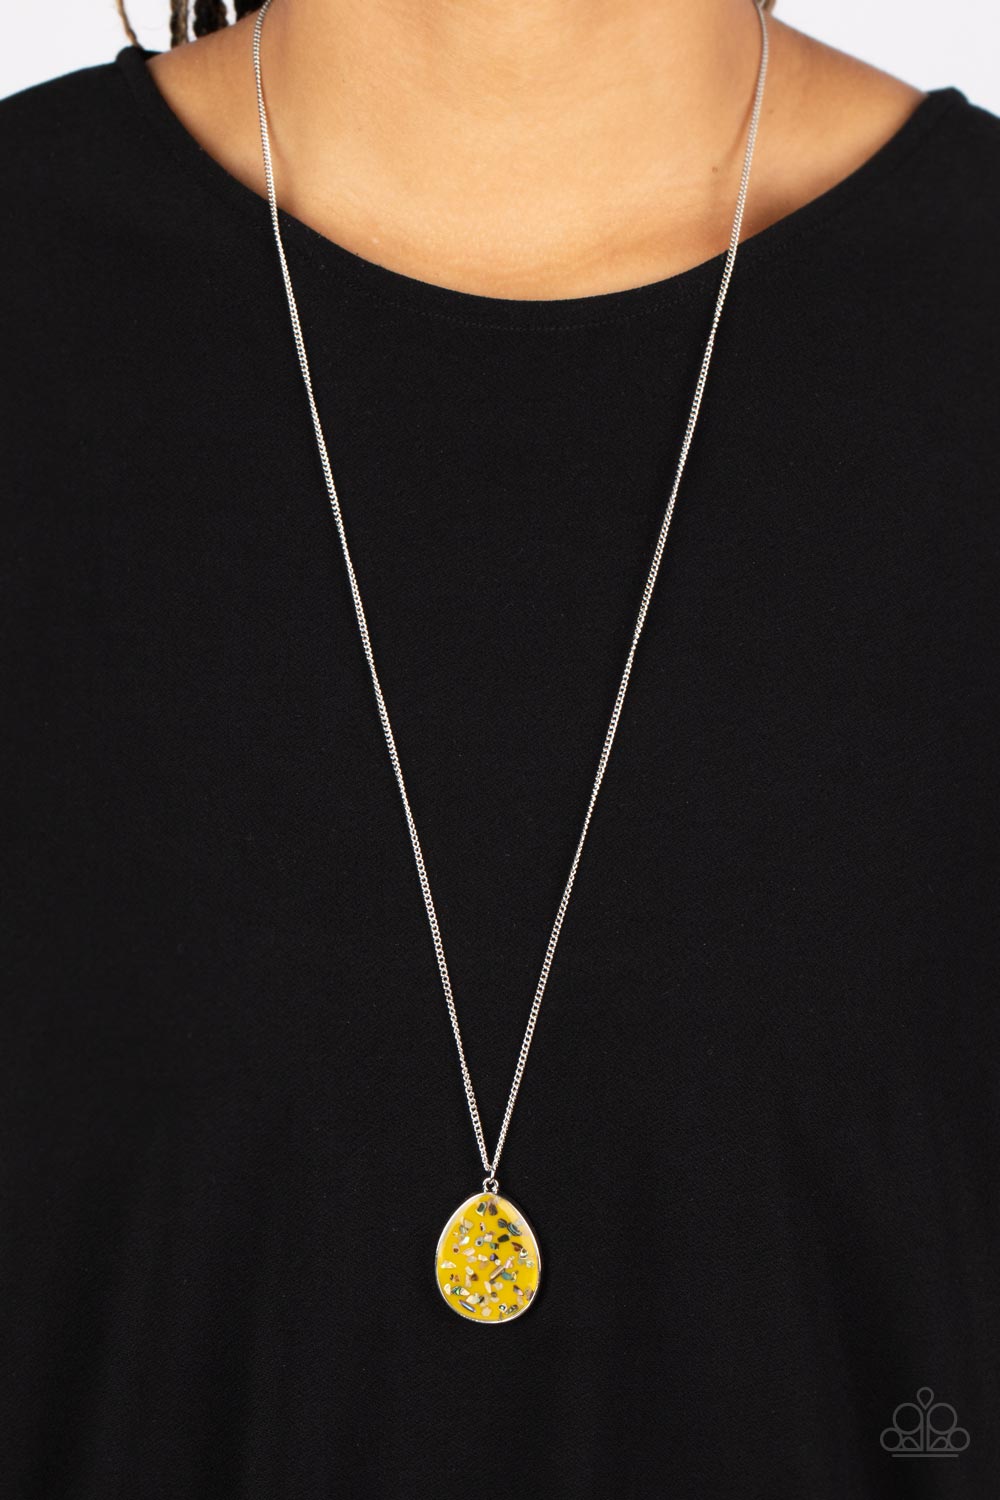 Shimmering Seafloors Mustard Yellow Necklace Paparazzi Accessories. Get Free Shipping. $5 Pendant 